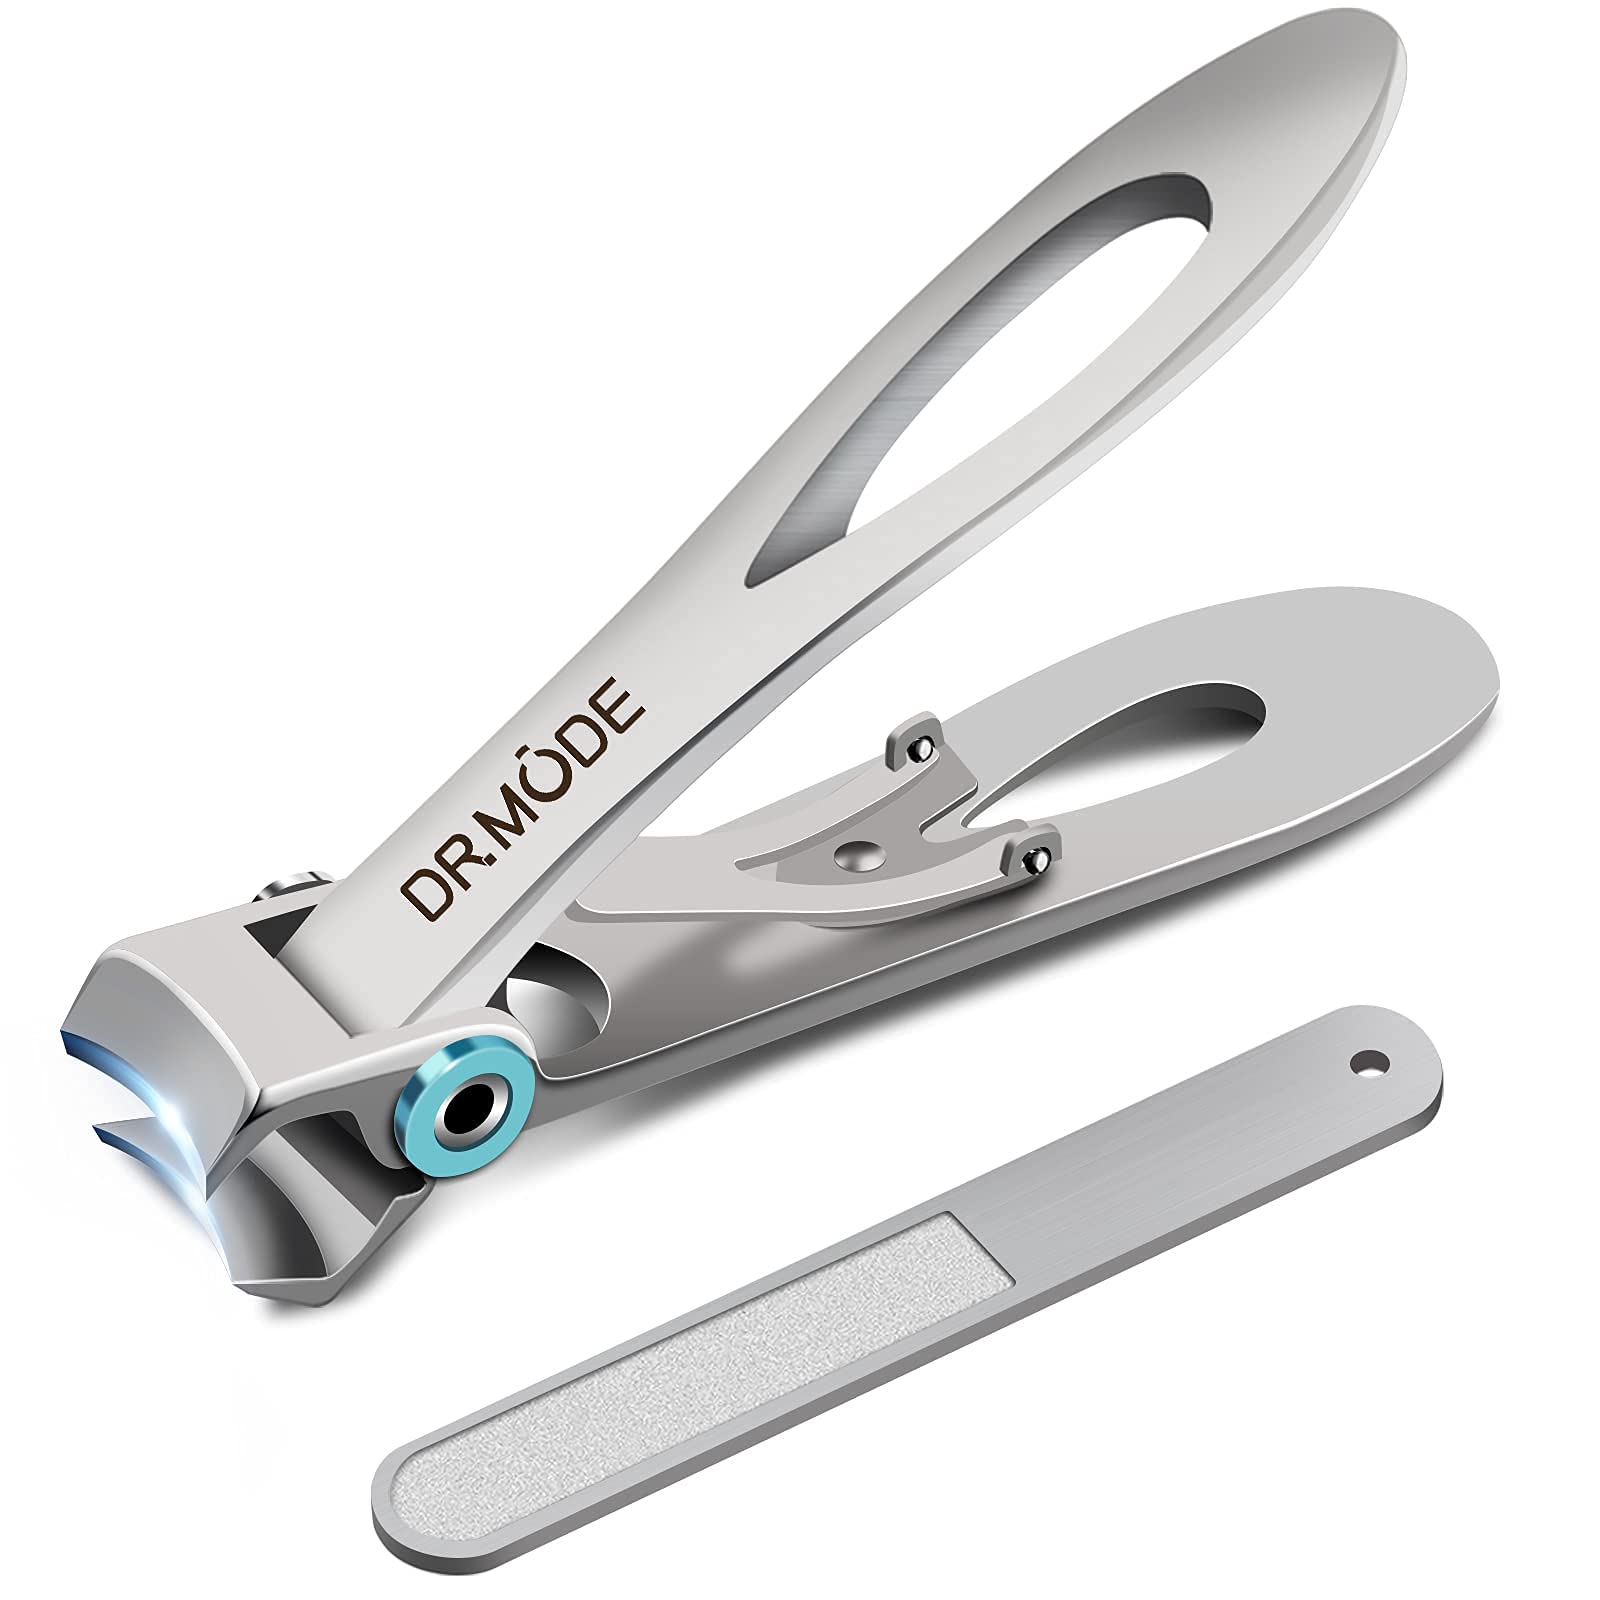  Nail Clippers for Thick Nails,Toenail Clippers for Ingrown  Nails,Fingernail Clipper,Toe Nails Cutter,Curved Handle- Good Looking  Silver : Beauty & Personal Care